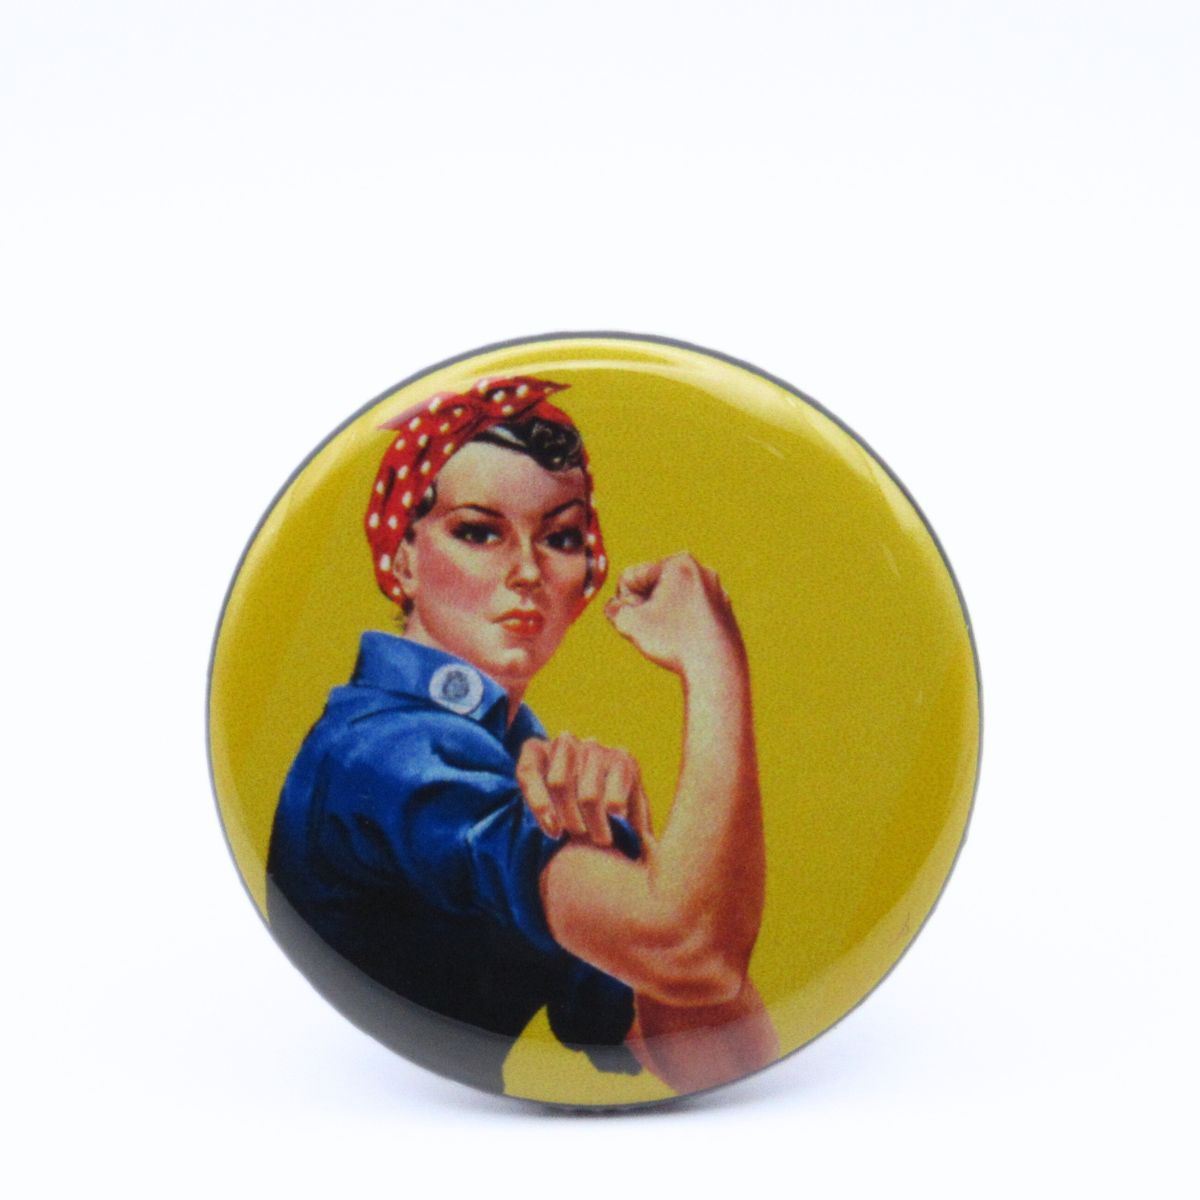 BooBooRoo Pinback Button (i.e. button, badge, pin) of the iconic Rosie the Riveter